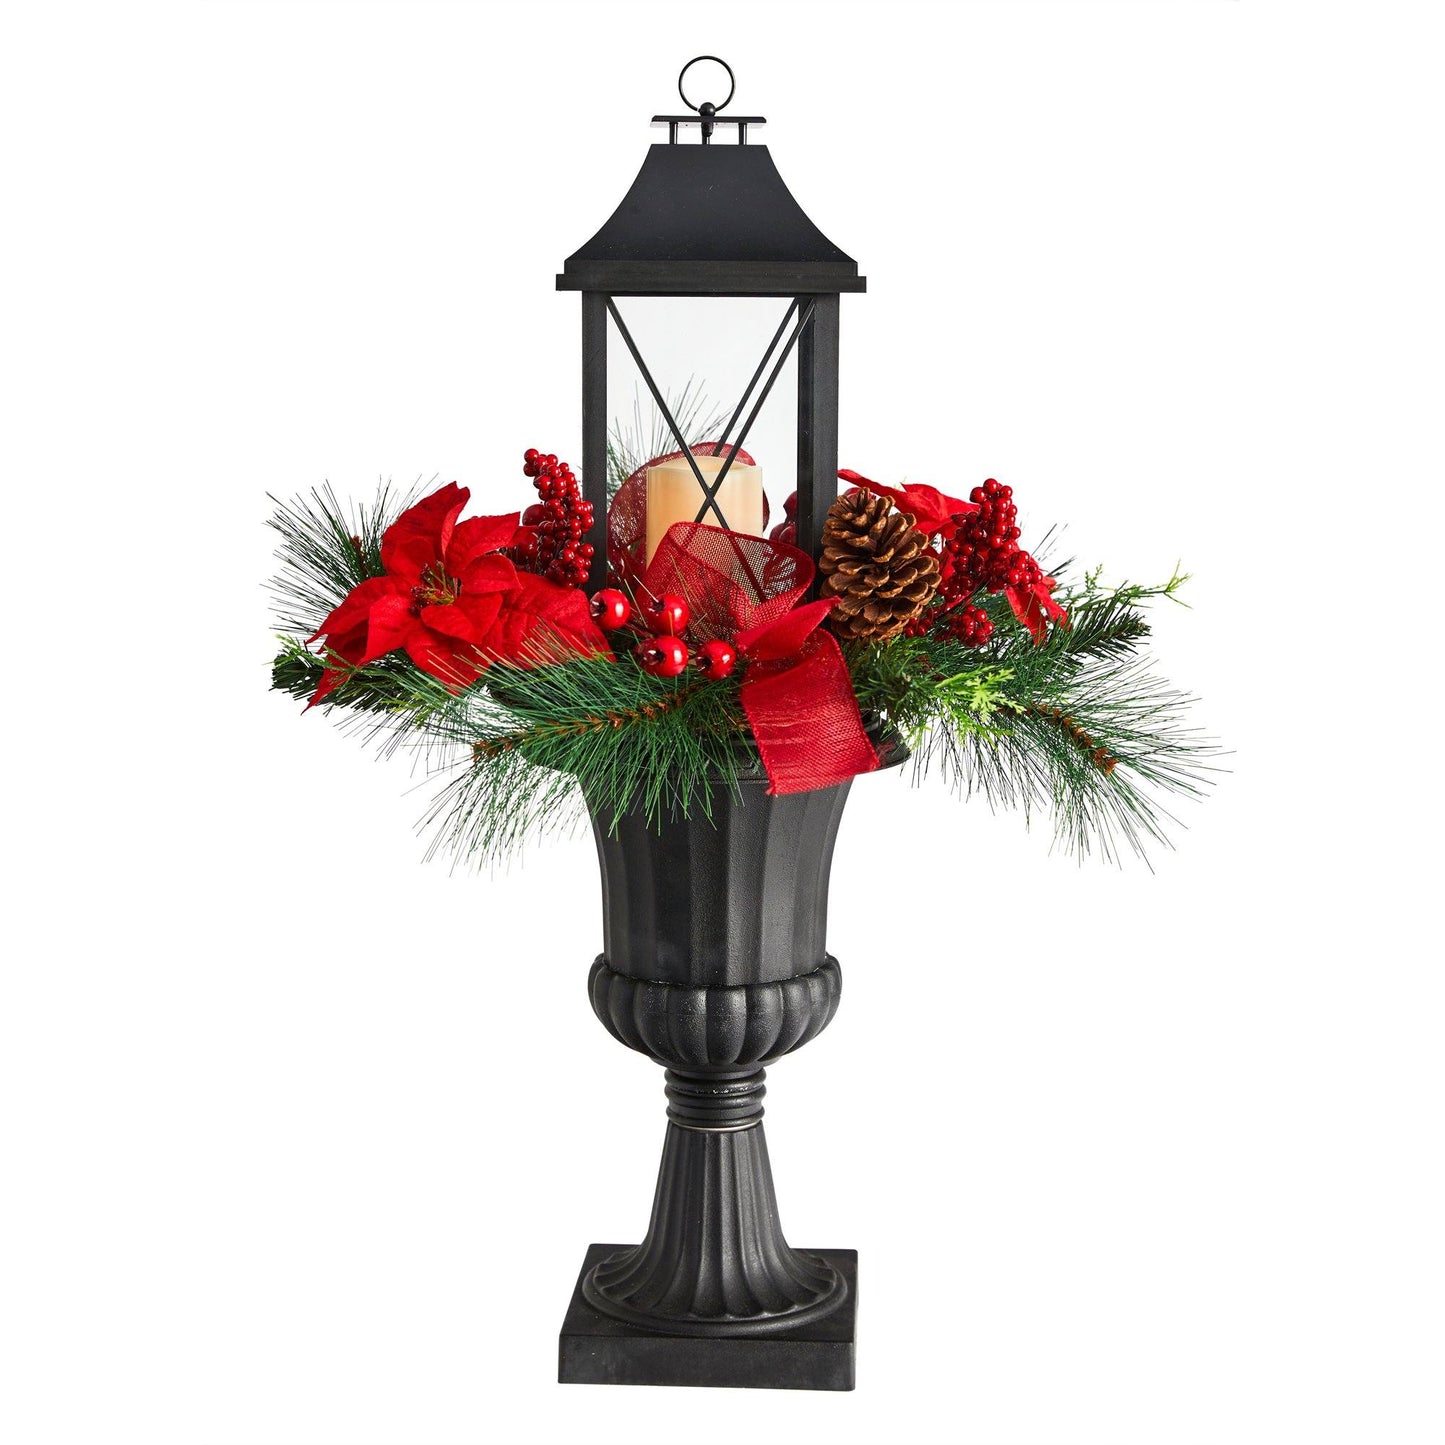 33” Holiday Berries and Poinsettia with Large Lantern and Included LED Candle by Nearly Natural